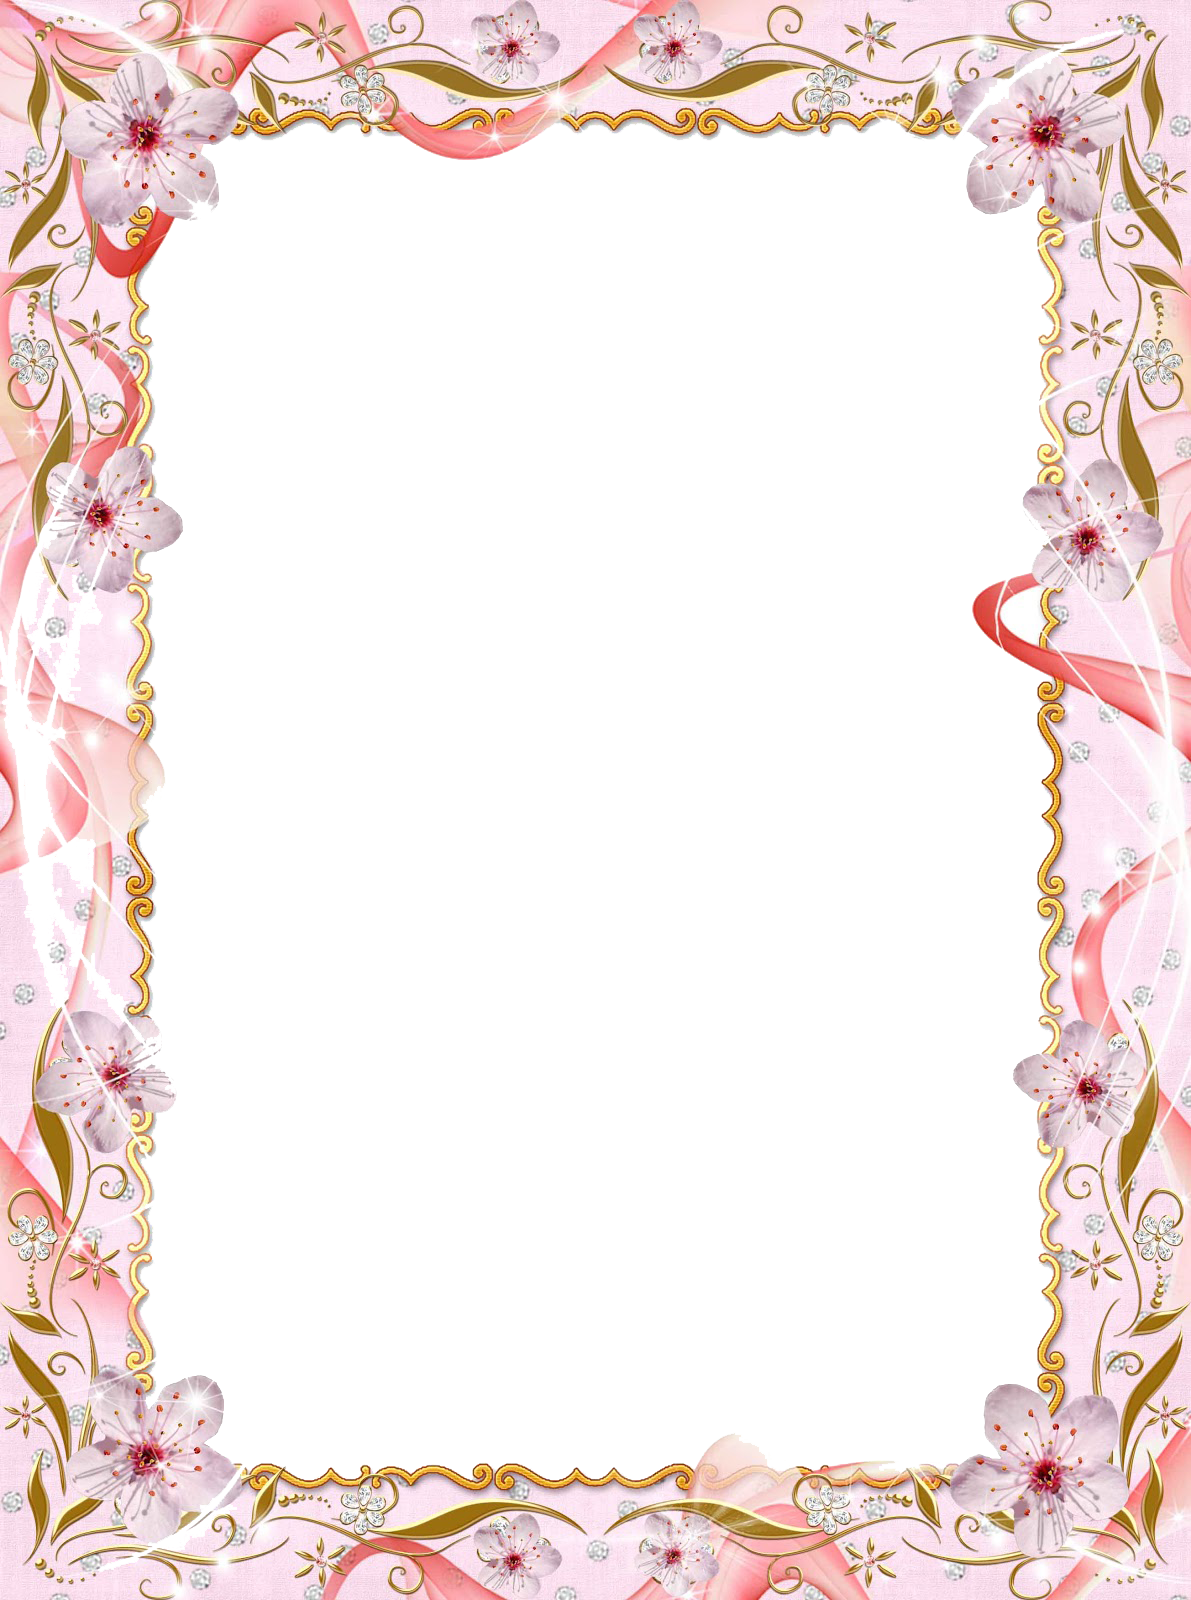 Wedding Picture Frame Png : Choose from over a million free vectors